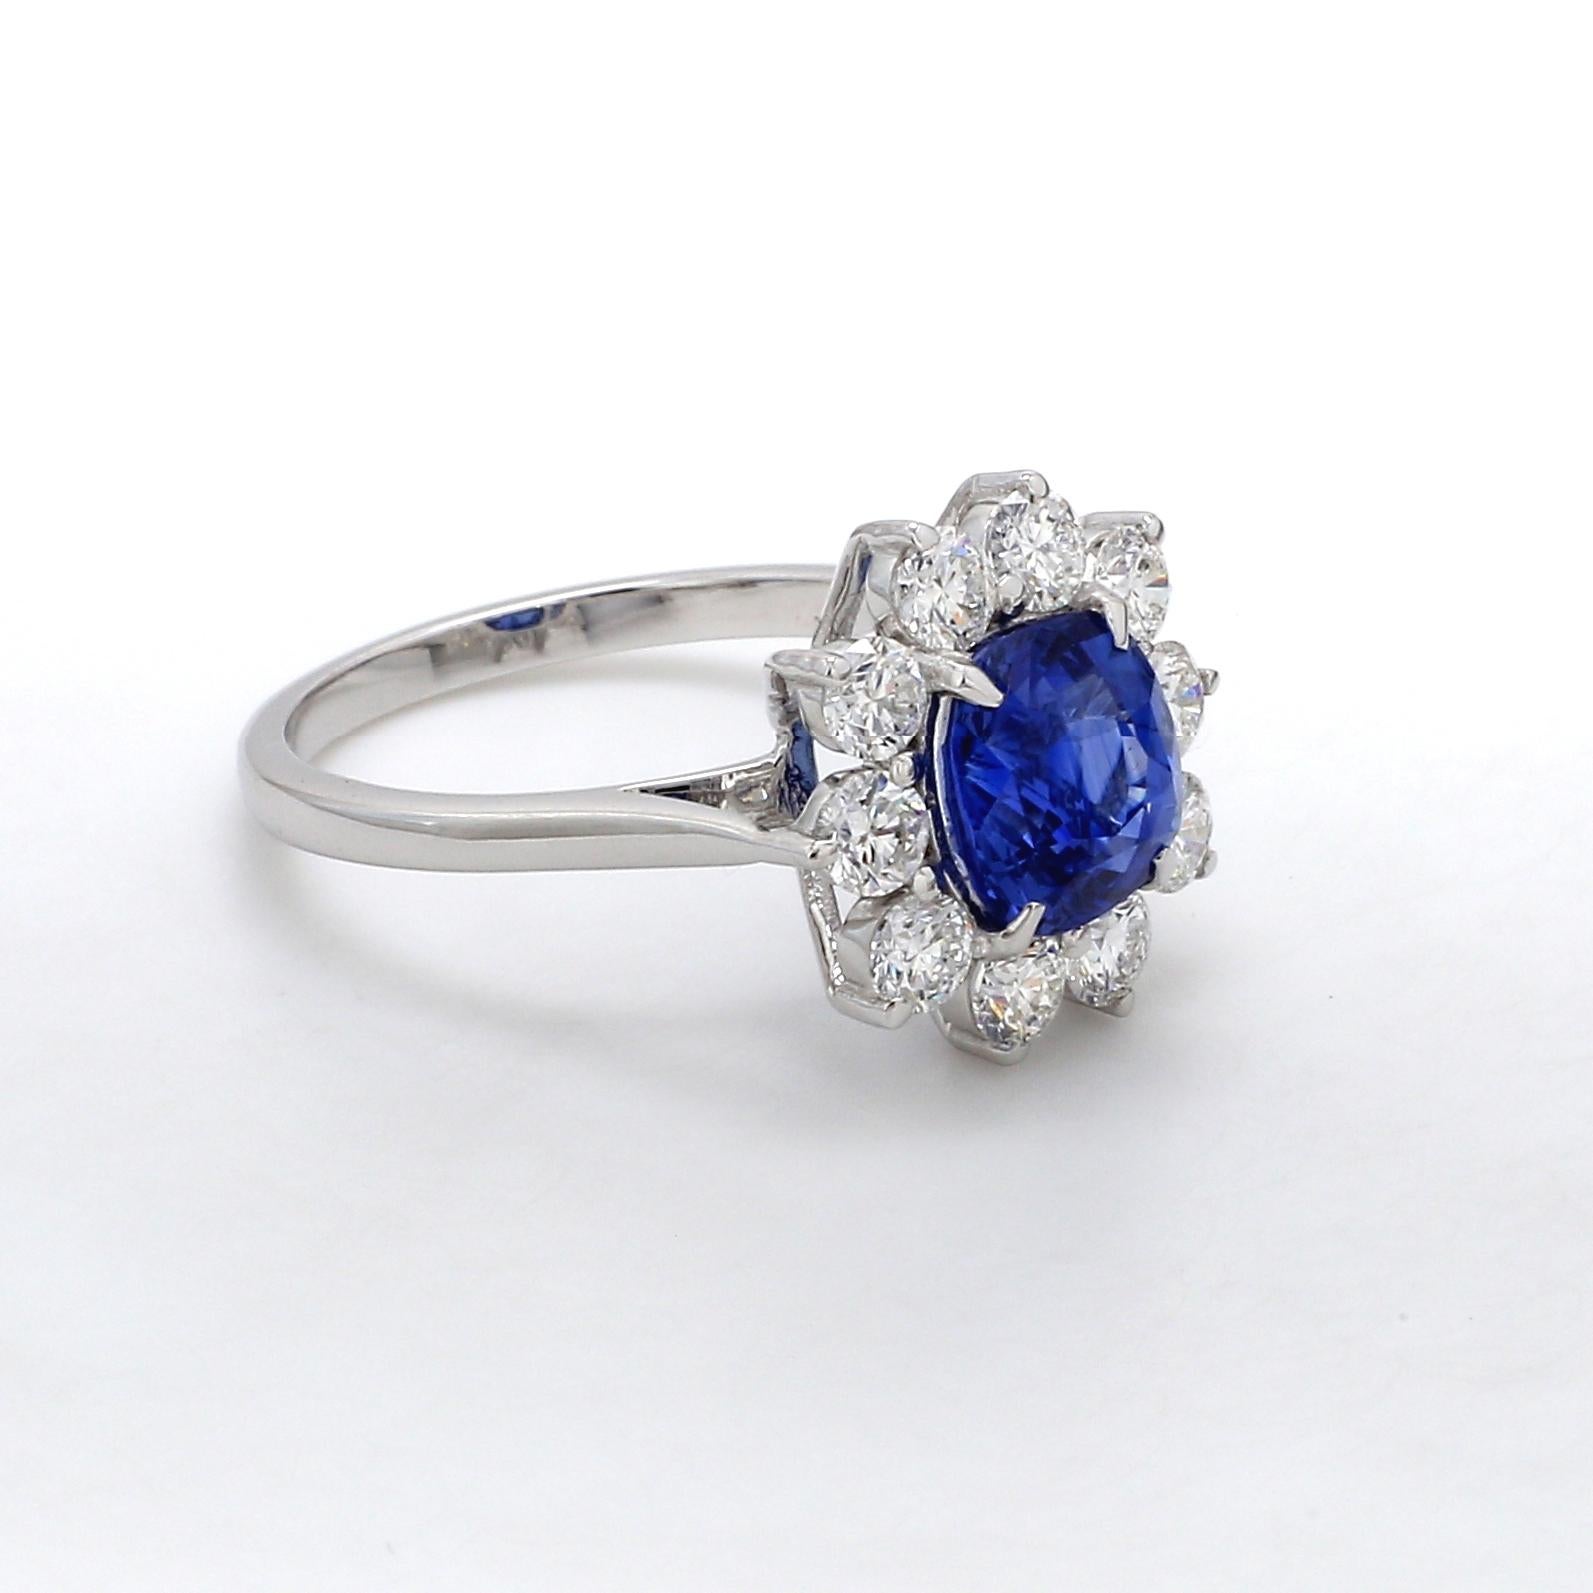 A Beautiful Handcrafted Ring in 18 karat White Gold  with Natural No Heat Lotus Certified Blue Sapphire of Madagascar Africa origin and Brilliant Cut Colorless Diamonds.

Sapphire Details
Weight: 2.55 carats (7.69 x 7.18 x 5.18 mm )
Color: Corn